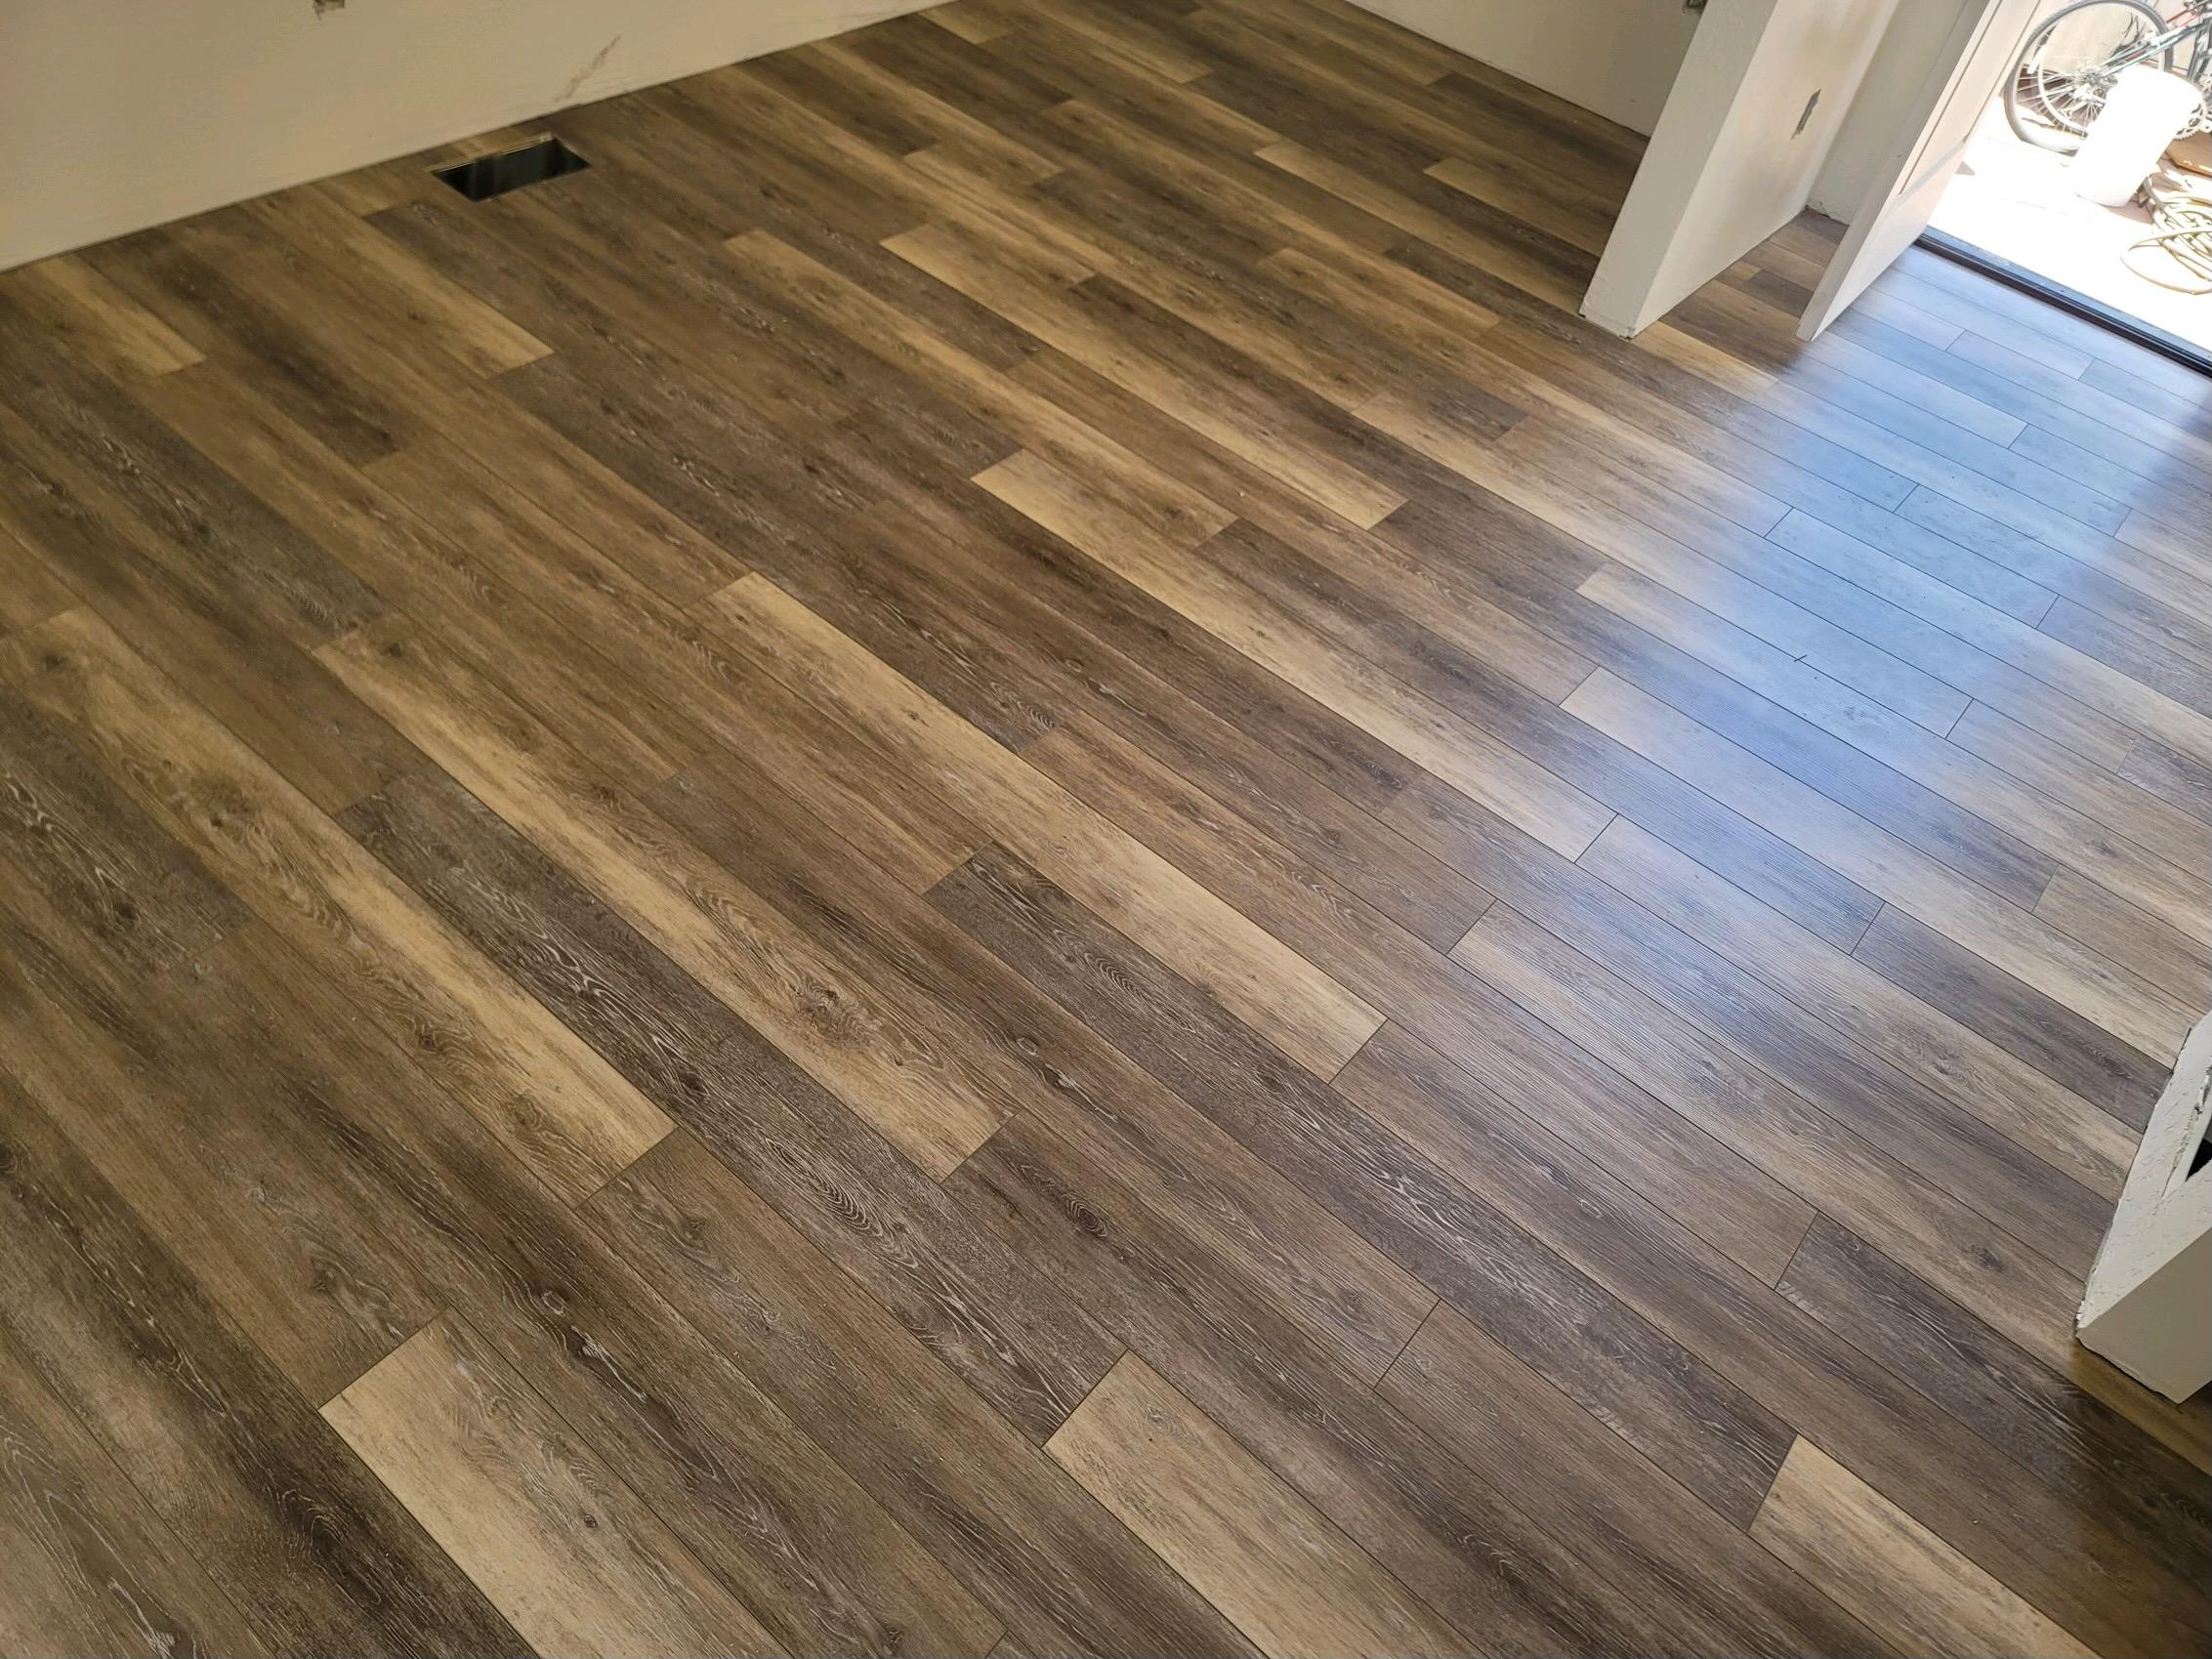 Grizzly's Discount Flooring Mesa (480)288-2771